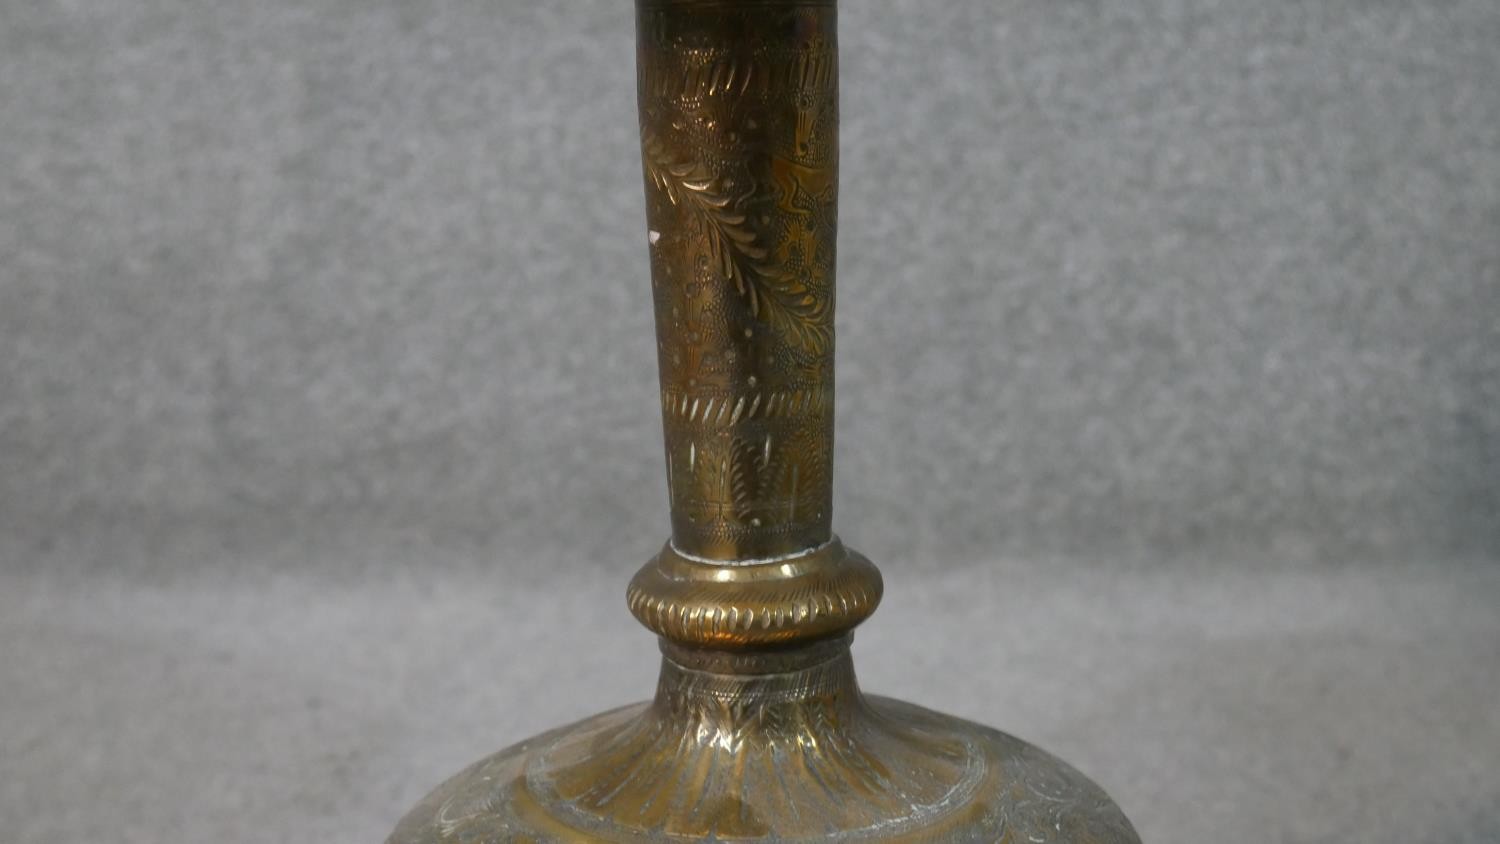 A pair of Indian engraved brass vases converted into table lamps, each with a figural design. H.60cm - Image 8 of 10